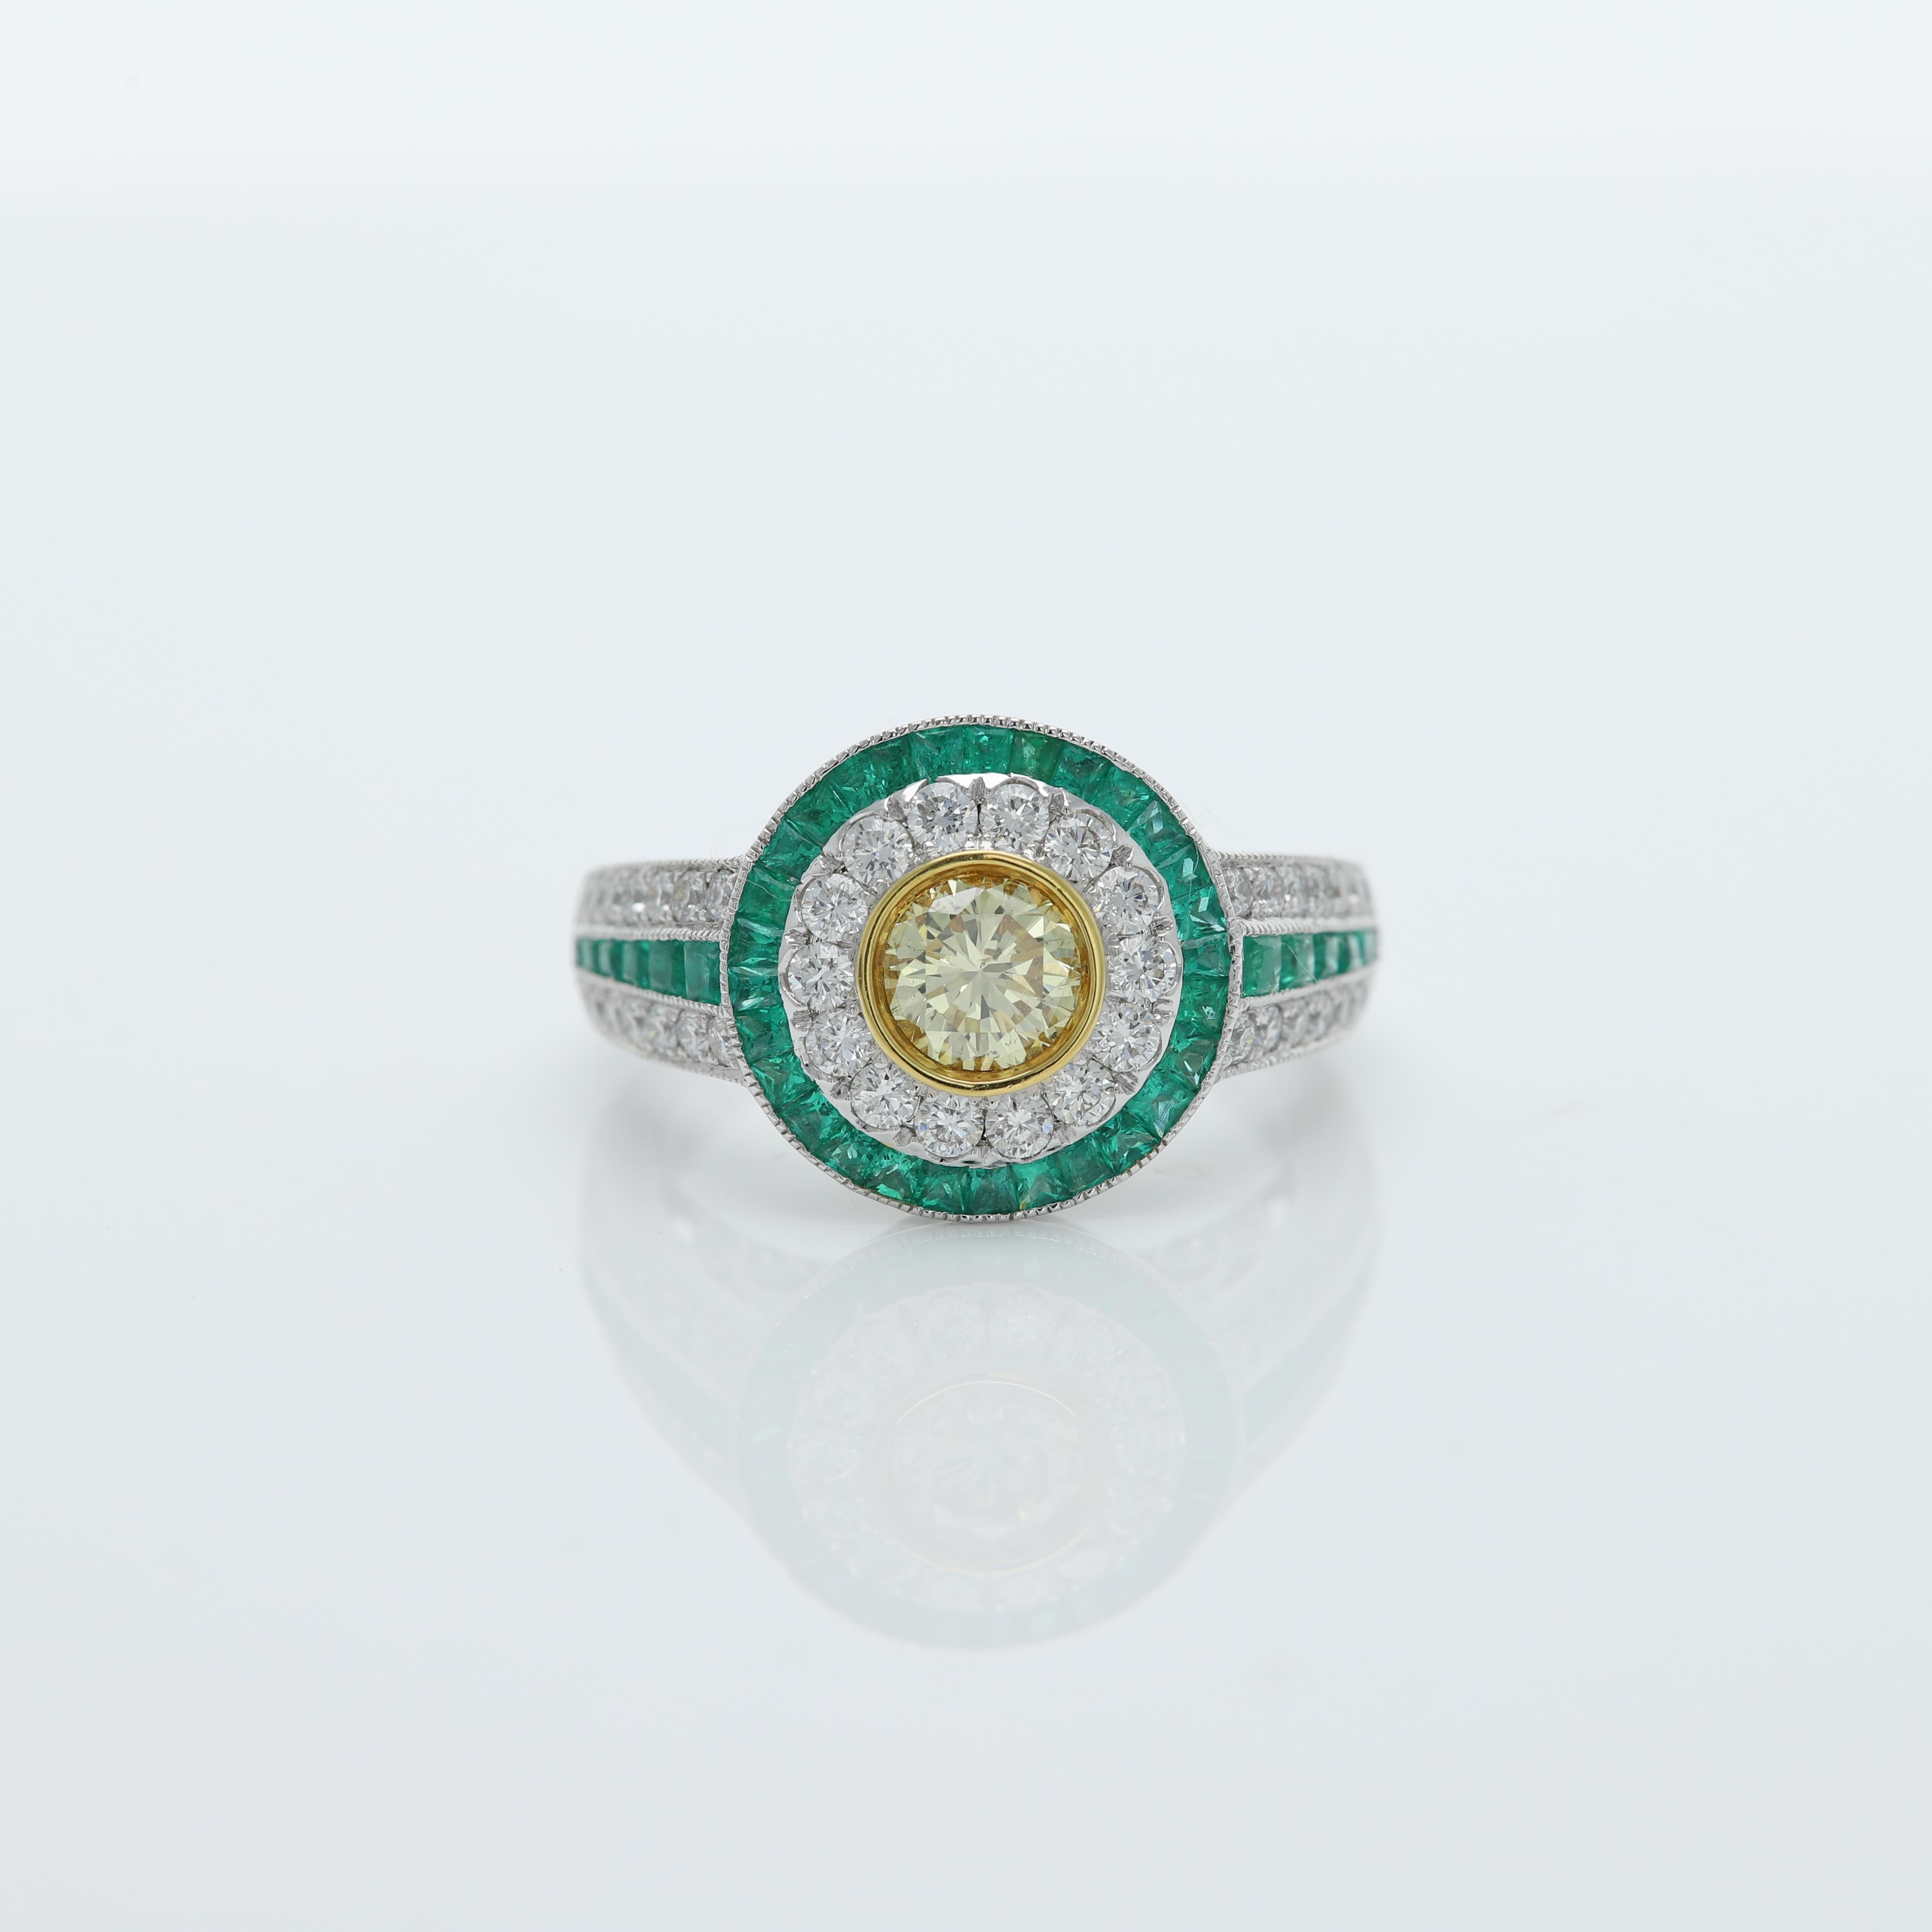 Art Deco Style Colorful Ring - Impressive and Bold
Center is Diamond surrounded with Green Emeralds, sides have also Emerald and Diamonds
All stones are Natural
18k White Gold 7.30 grams
Center Diamond size - 0.58 carat (6 mm) Round Shape Brilliant